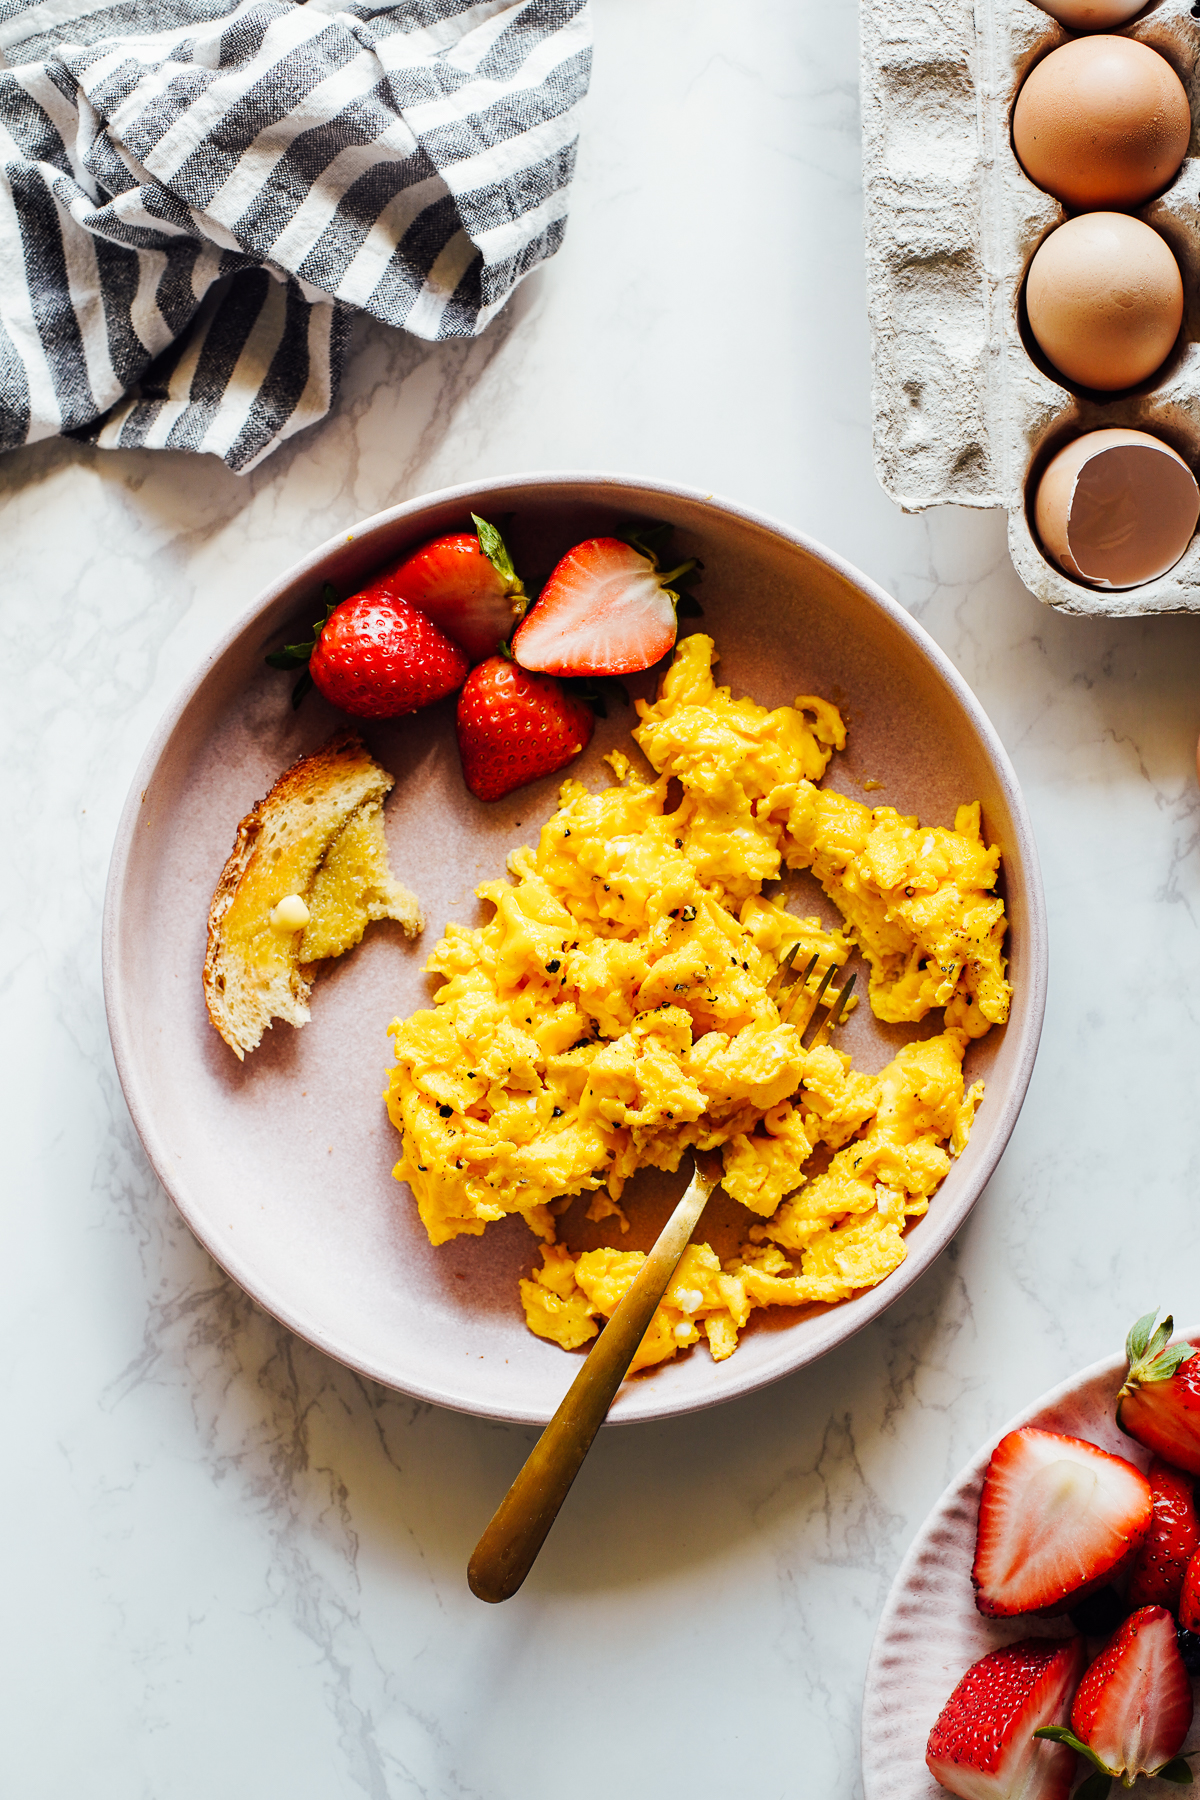 Scrambled eggs on a pink plate with strawberries and cracked eggs in a egg carton on the side.